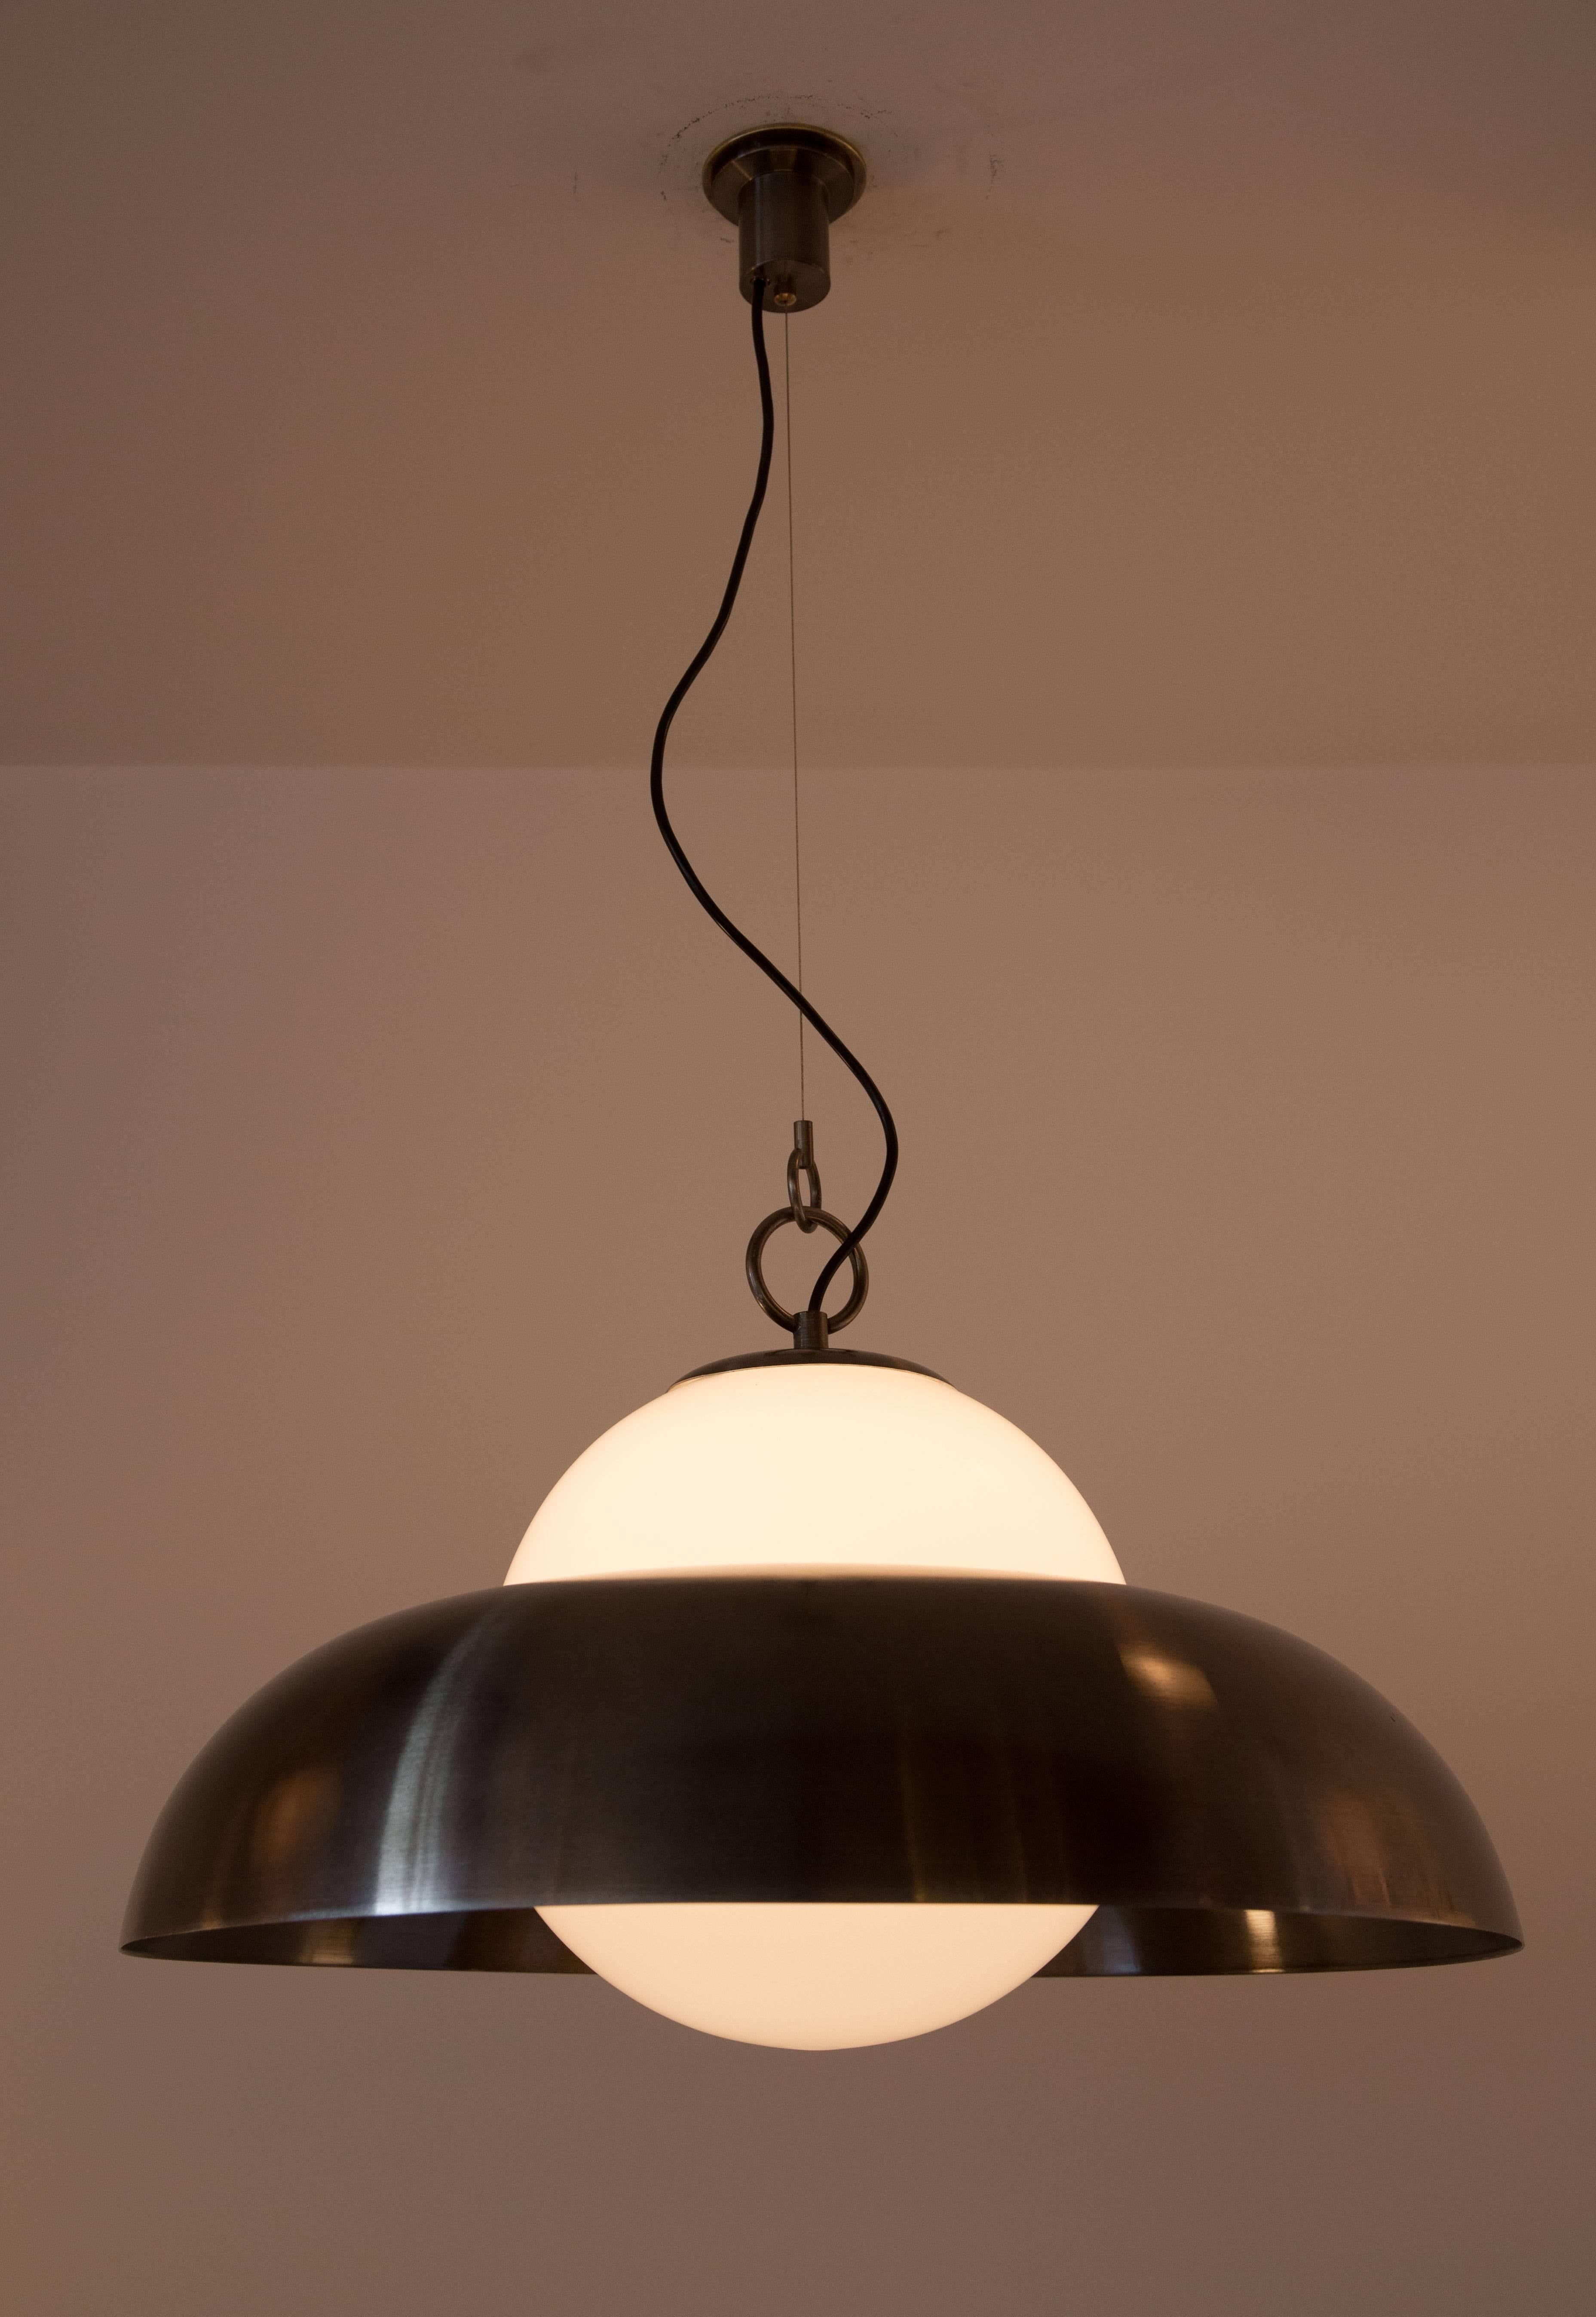 Metal and milk glass suspension lamp model A288 by Sergio Asti produced for Candle. Made in Italy, 1970. 12